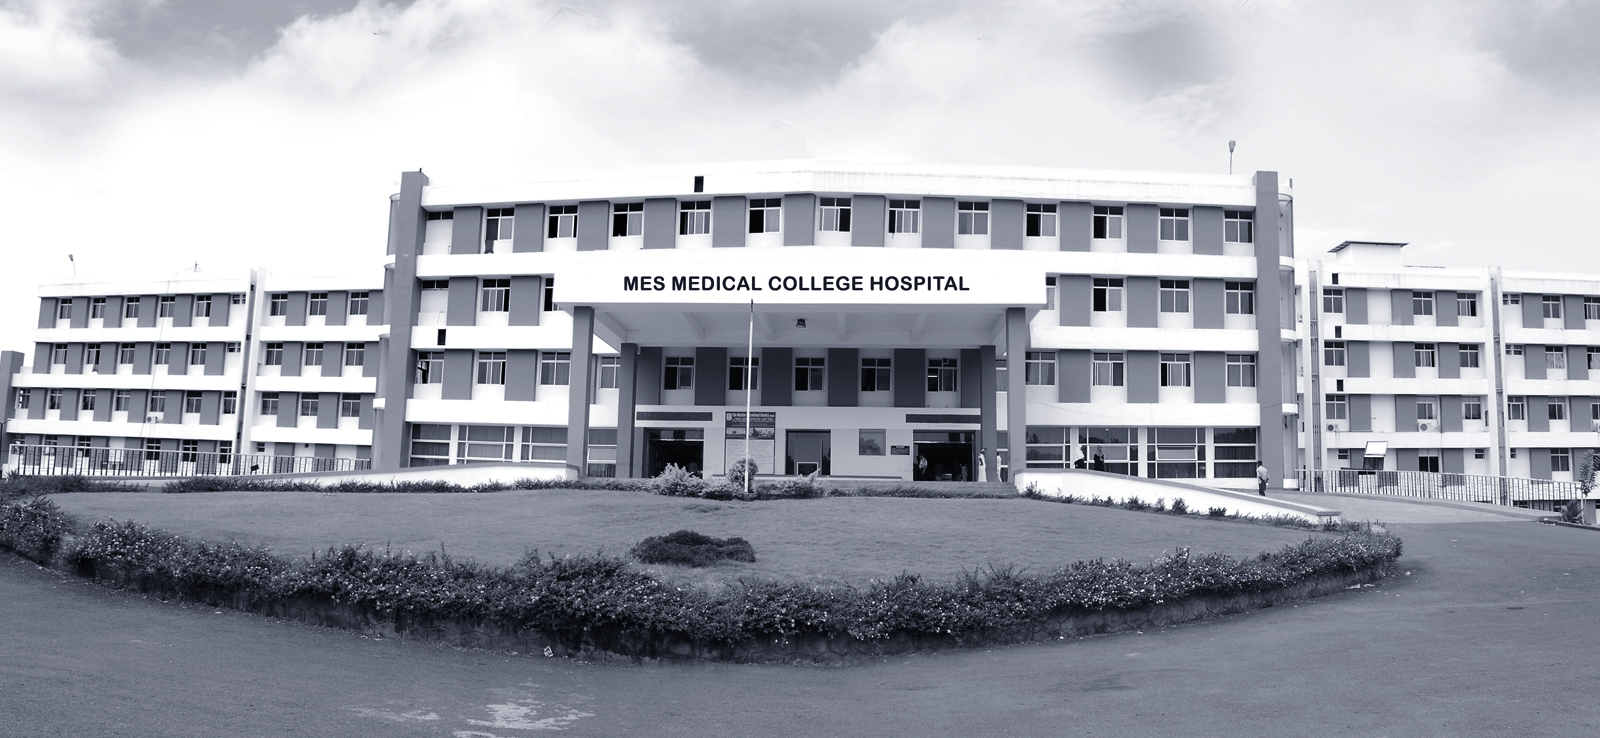 private-medical-colleges-in-kerala